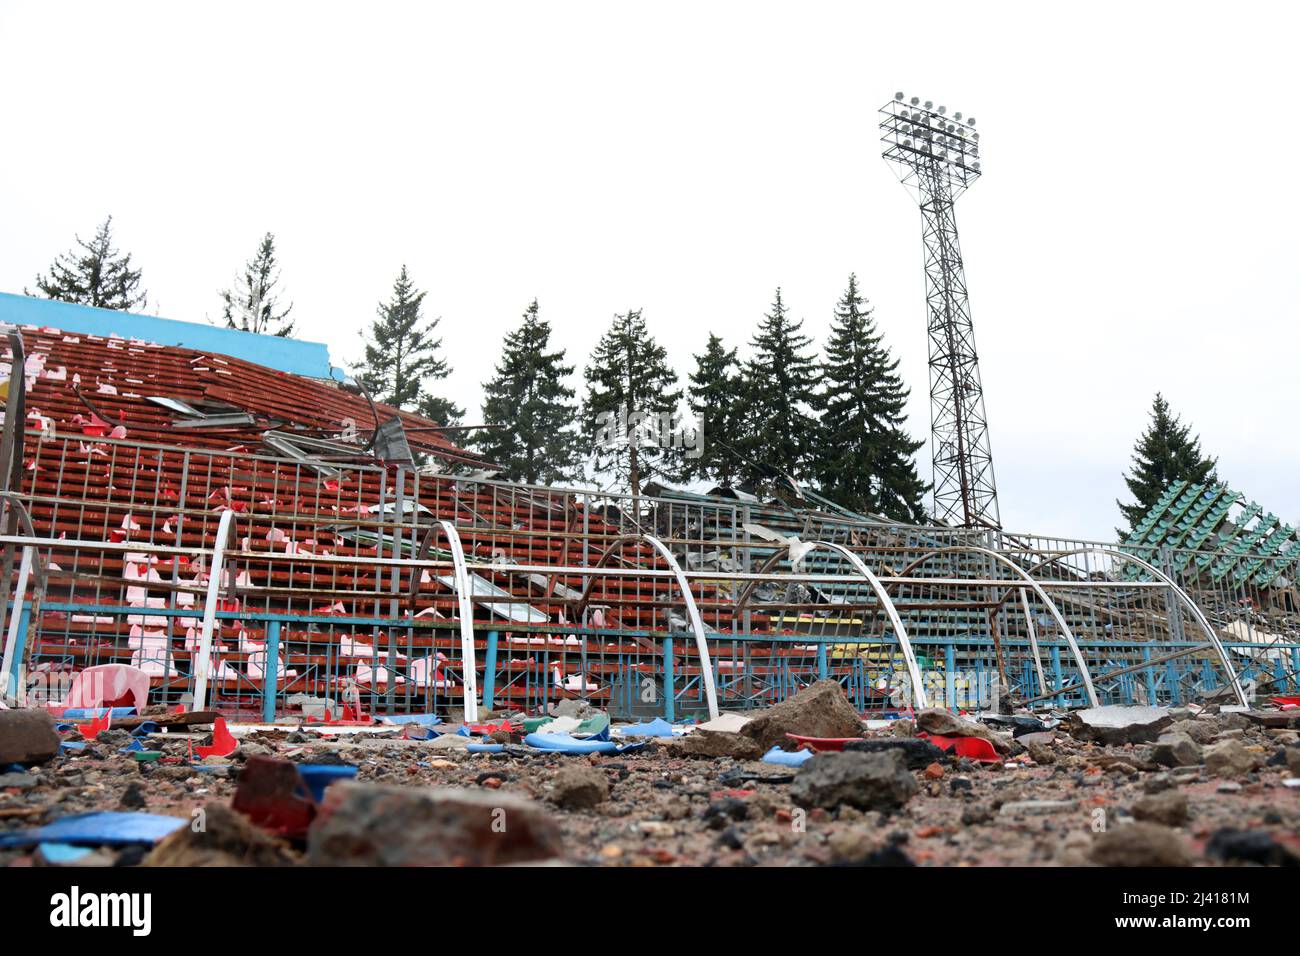 Non Exclusive: CHERNIHIV, UKRAINE - APRIL 9, 2022 - The damaged rows of seats are pictured on the stands of the Chernihiv Olympic Sports Training Cent Stock Photo